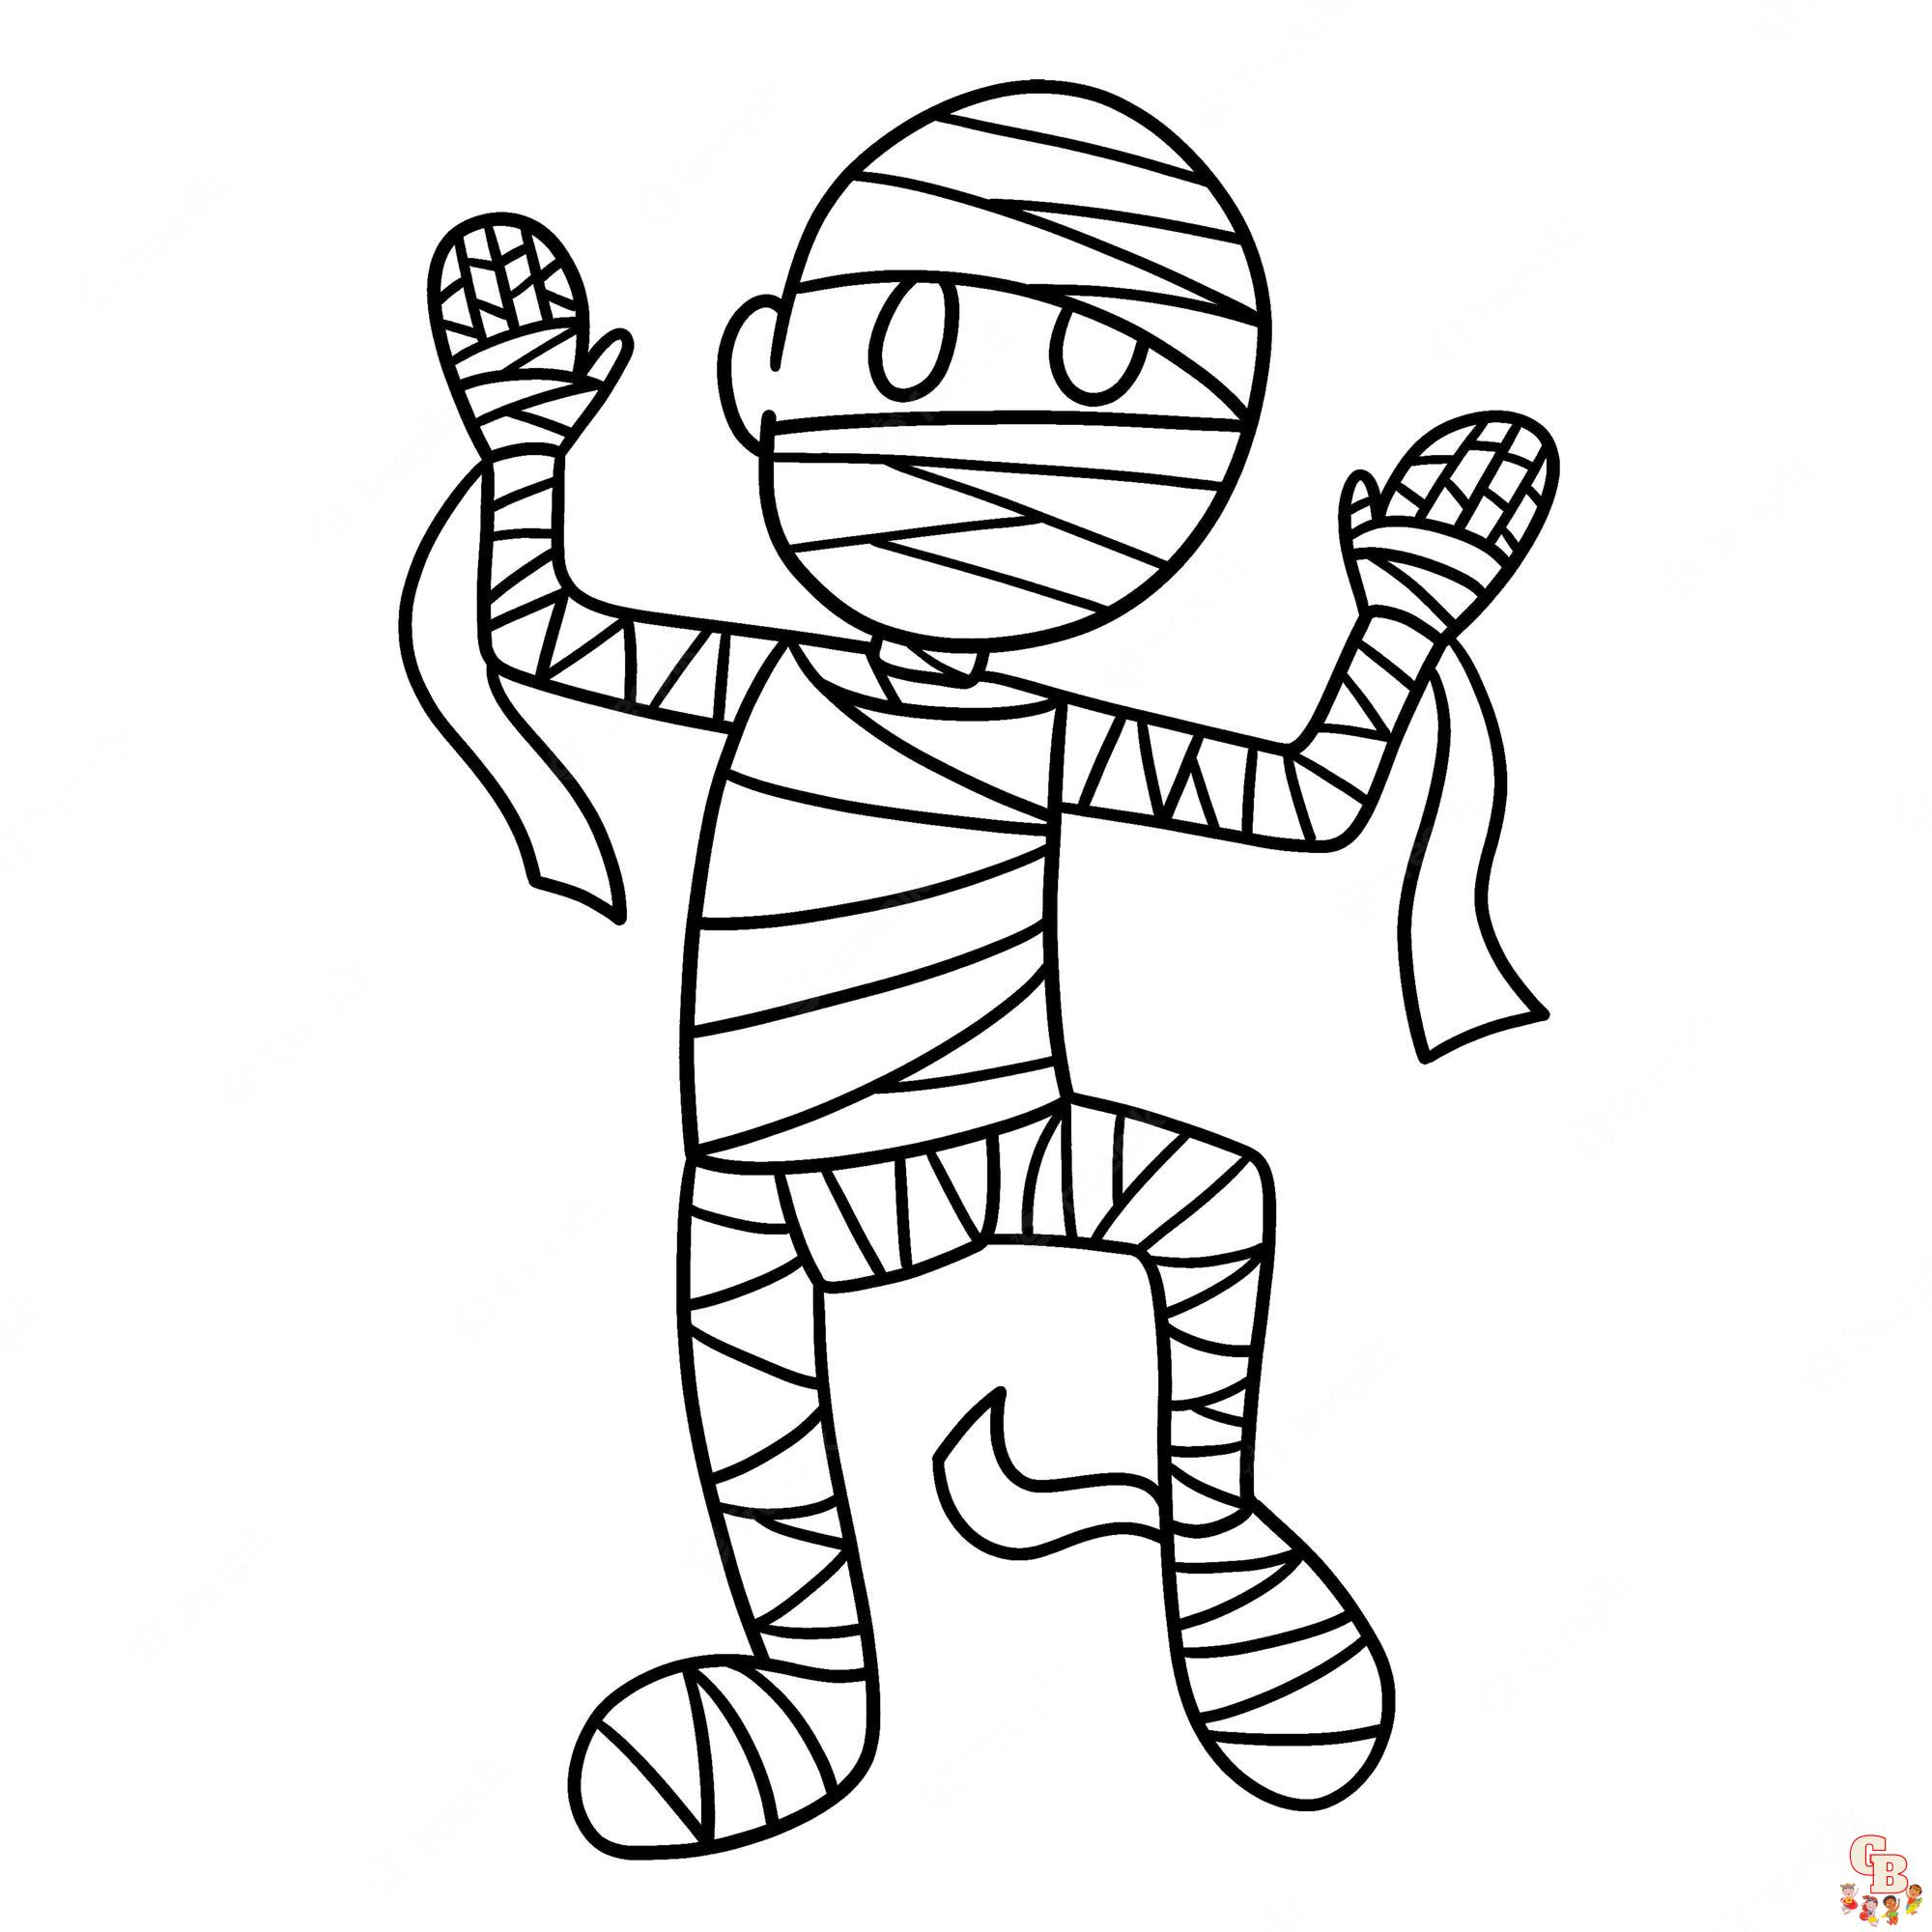 Mummy coloring pages for kids